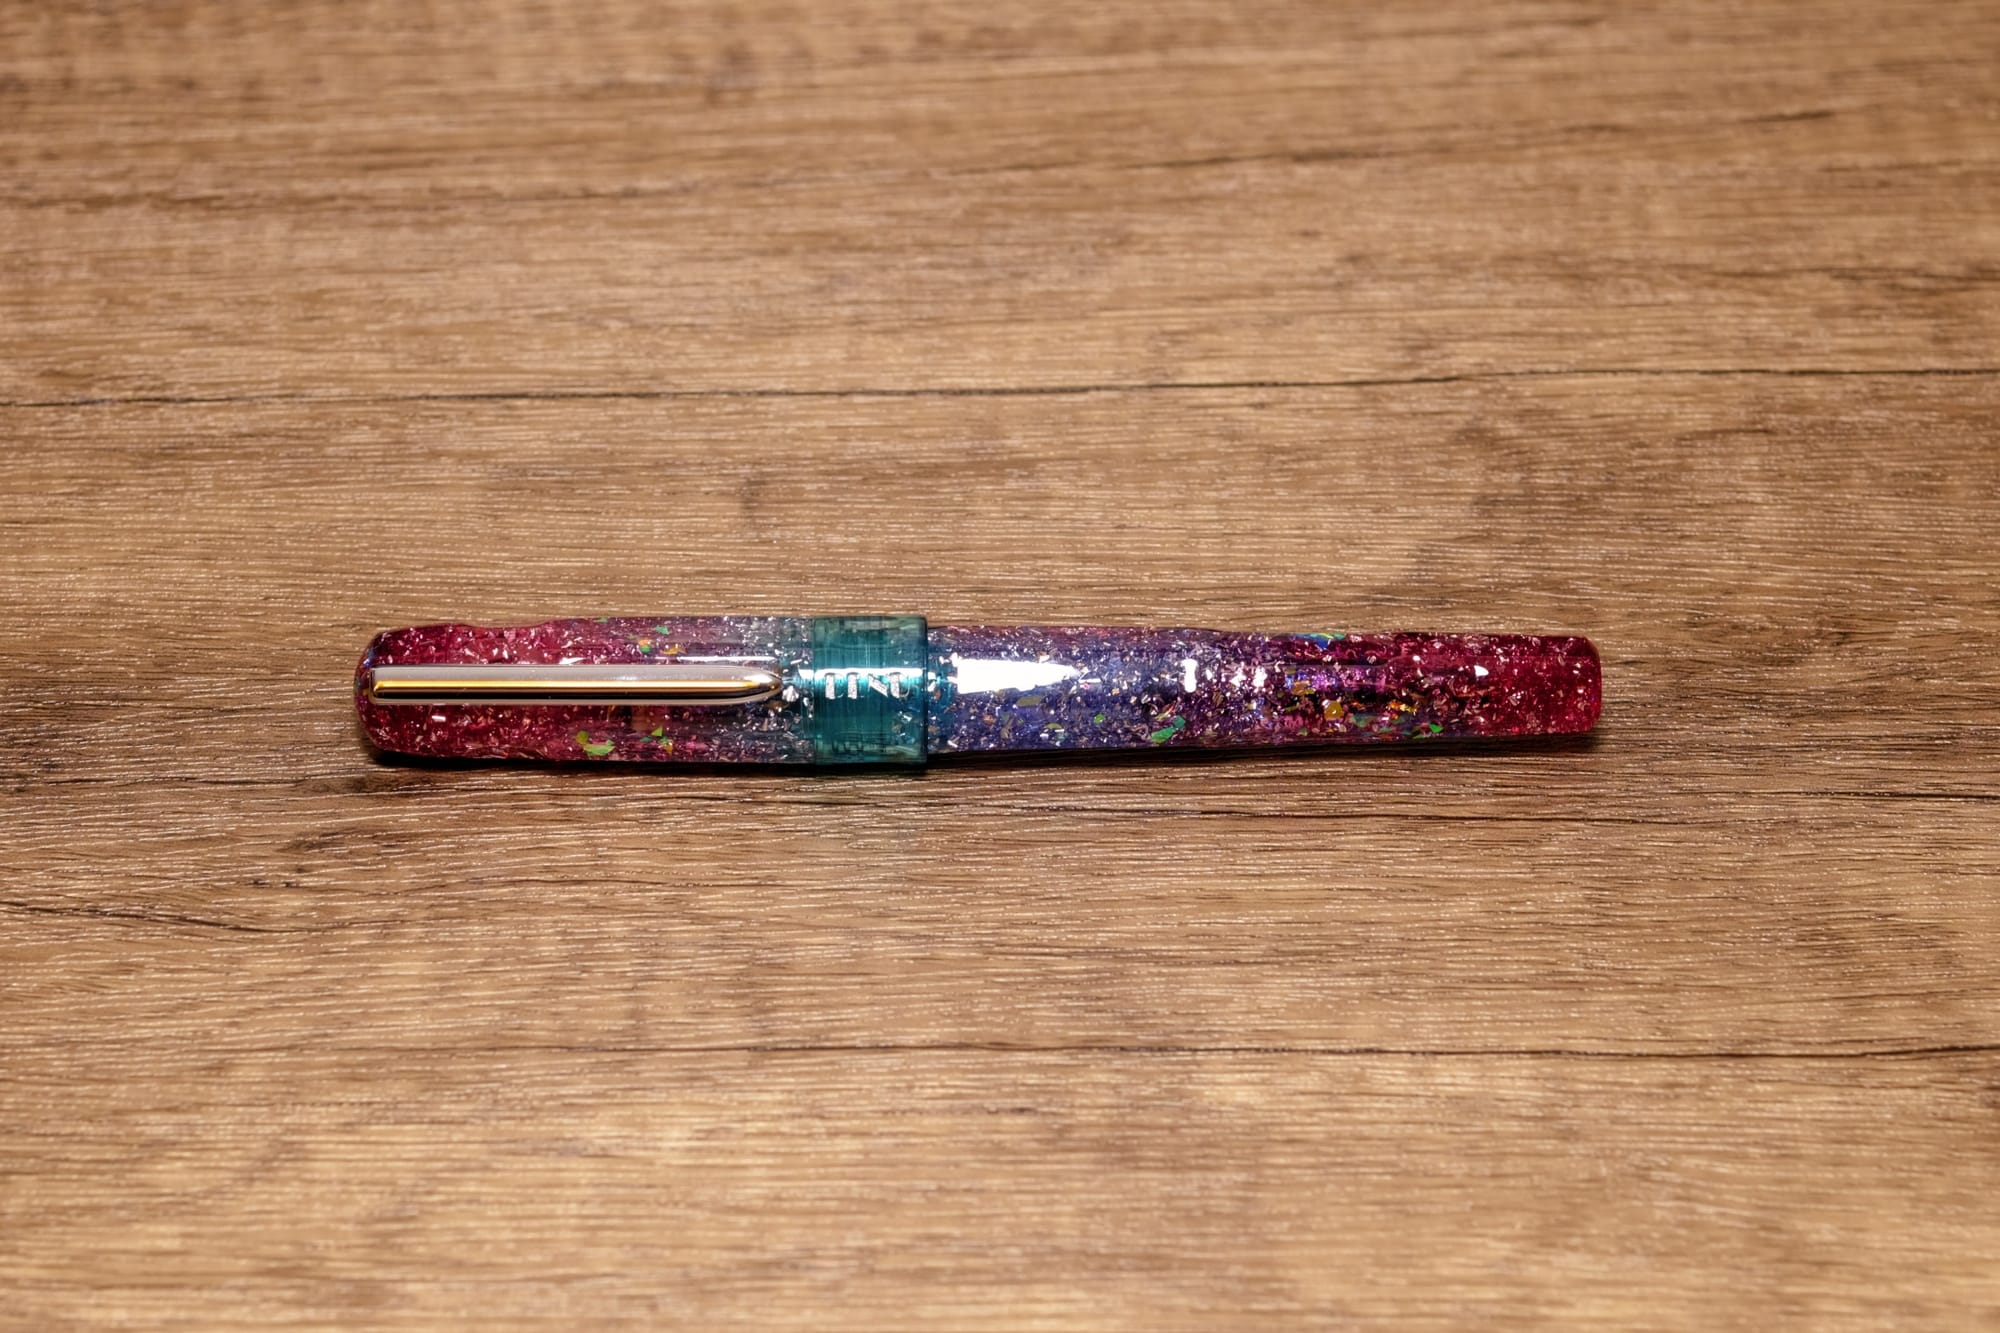 A fountain pen with a dark pink to aqua to lavender to dark pink gradient resin body infused with holographic glitter flakes